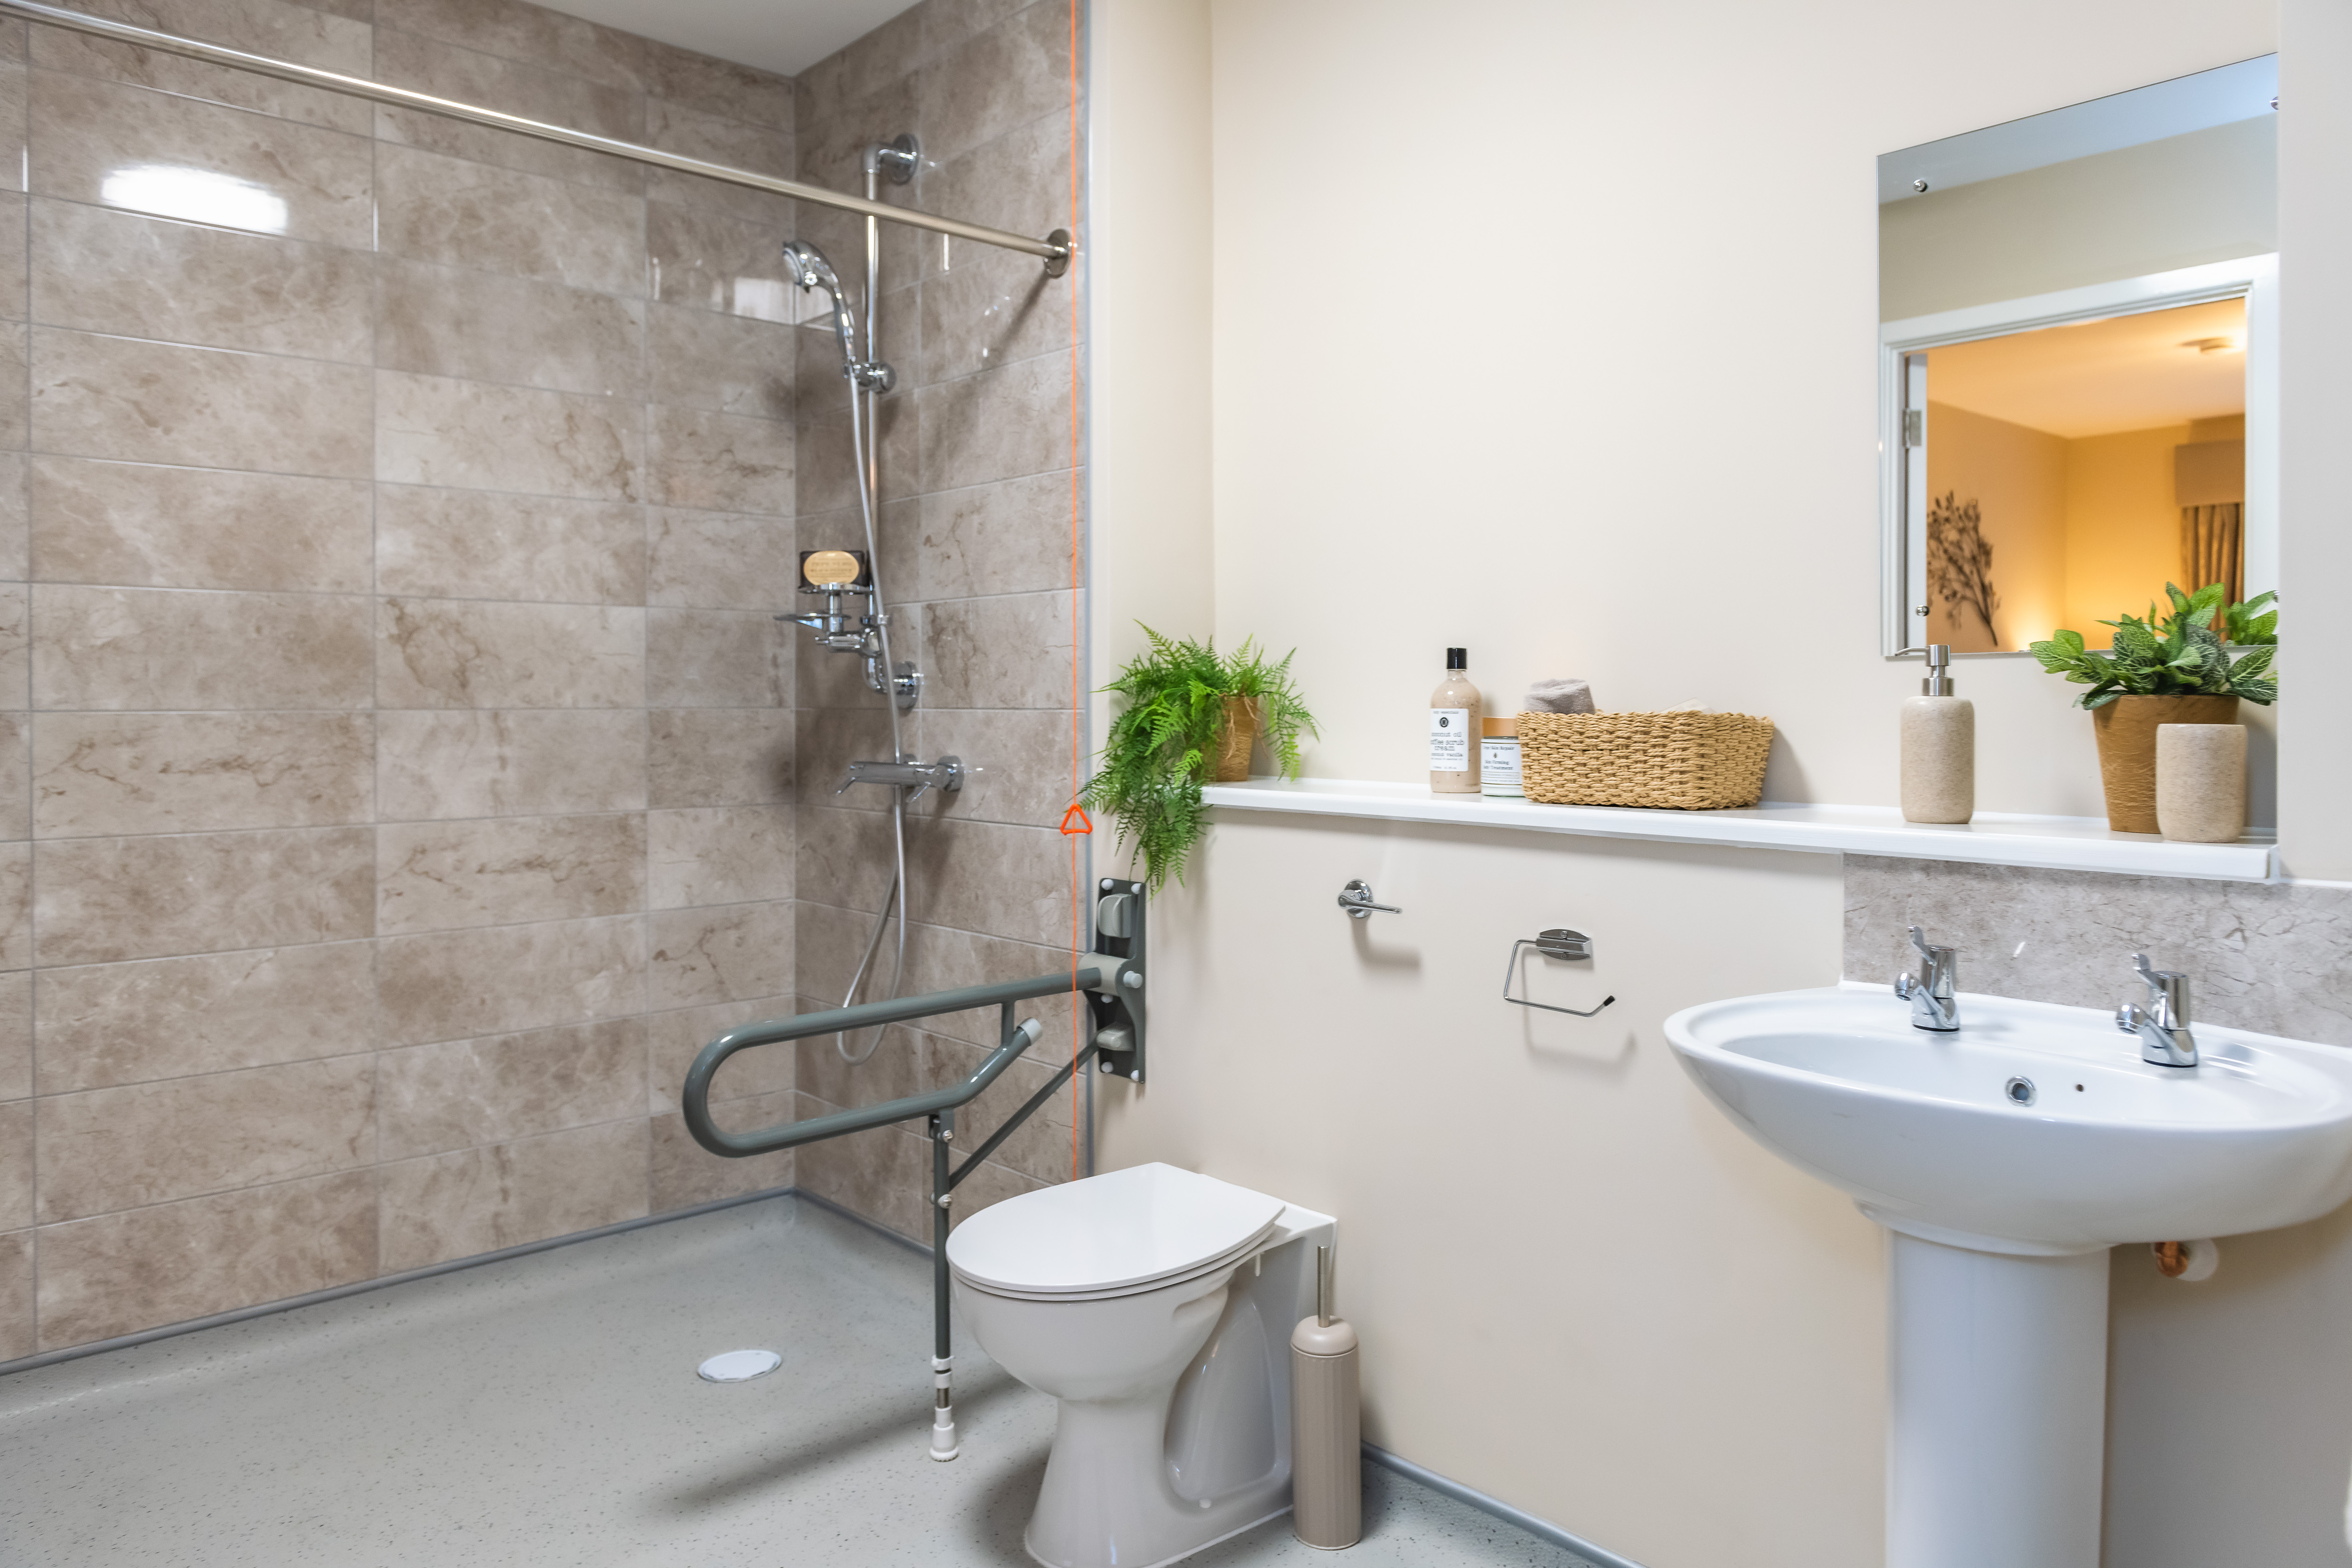 The dark tiles in the walk-in shower contrast with the lighter walls to help provide depth and give visual reference for those who are visually impaired.